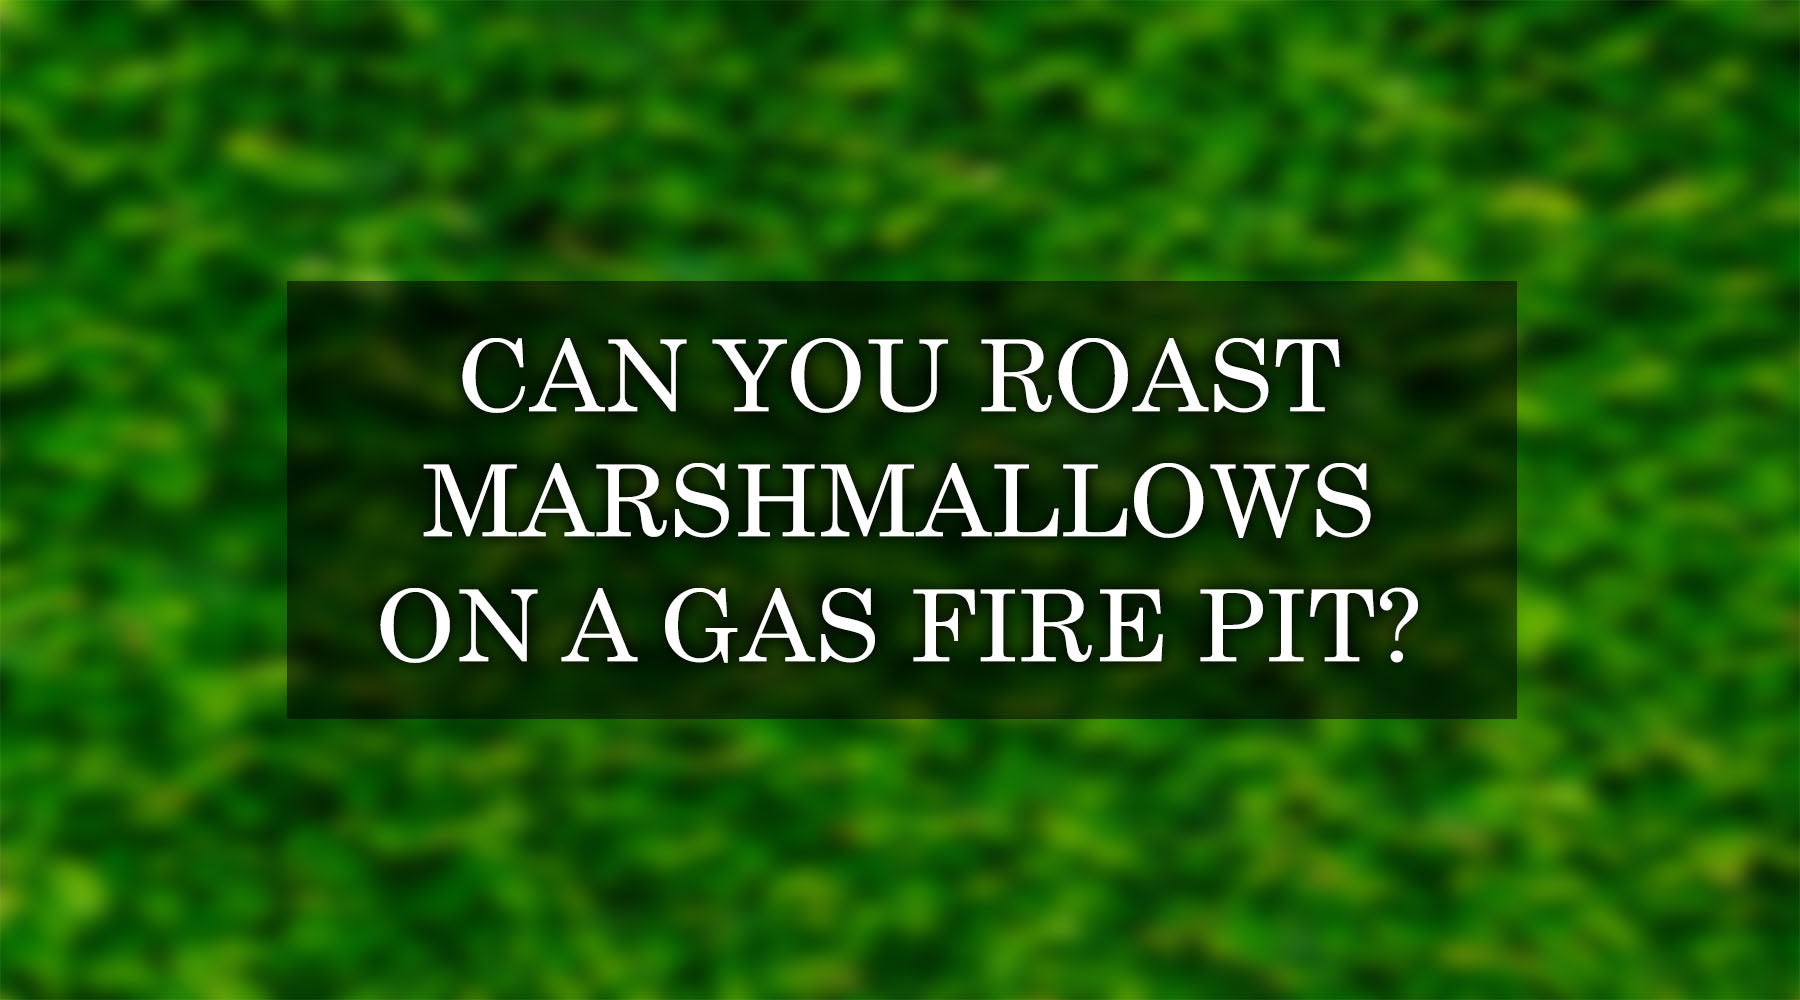 Can You Roast Marshmallows on a Gas Fire Pit?